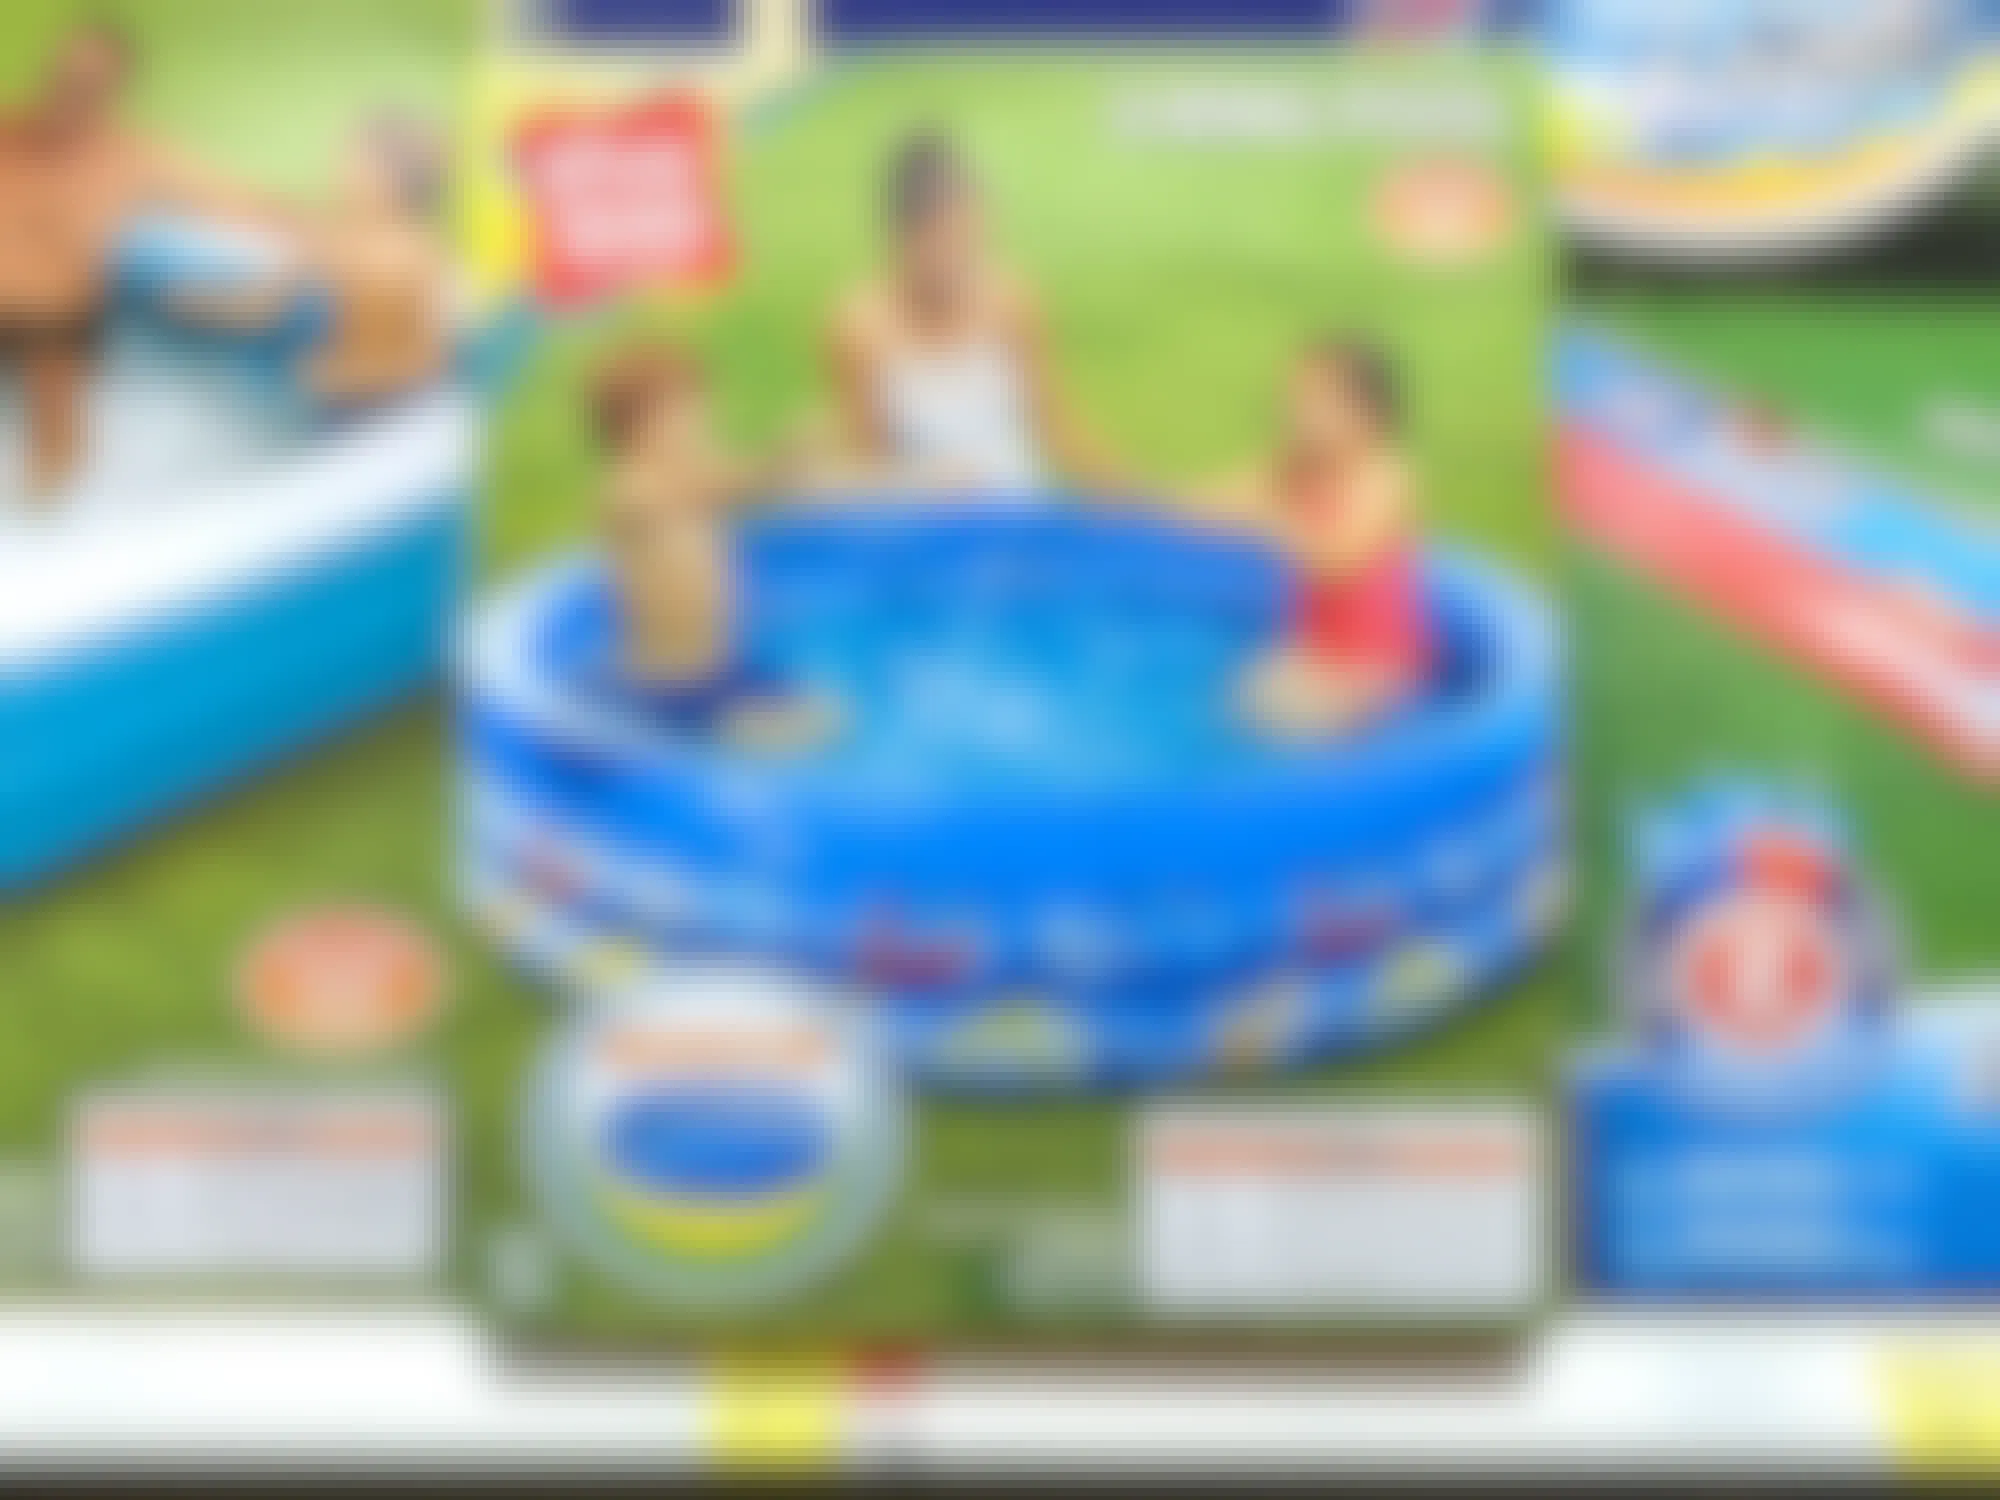 play day 3-ring pool for $7.97 on walmart store shelf